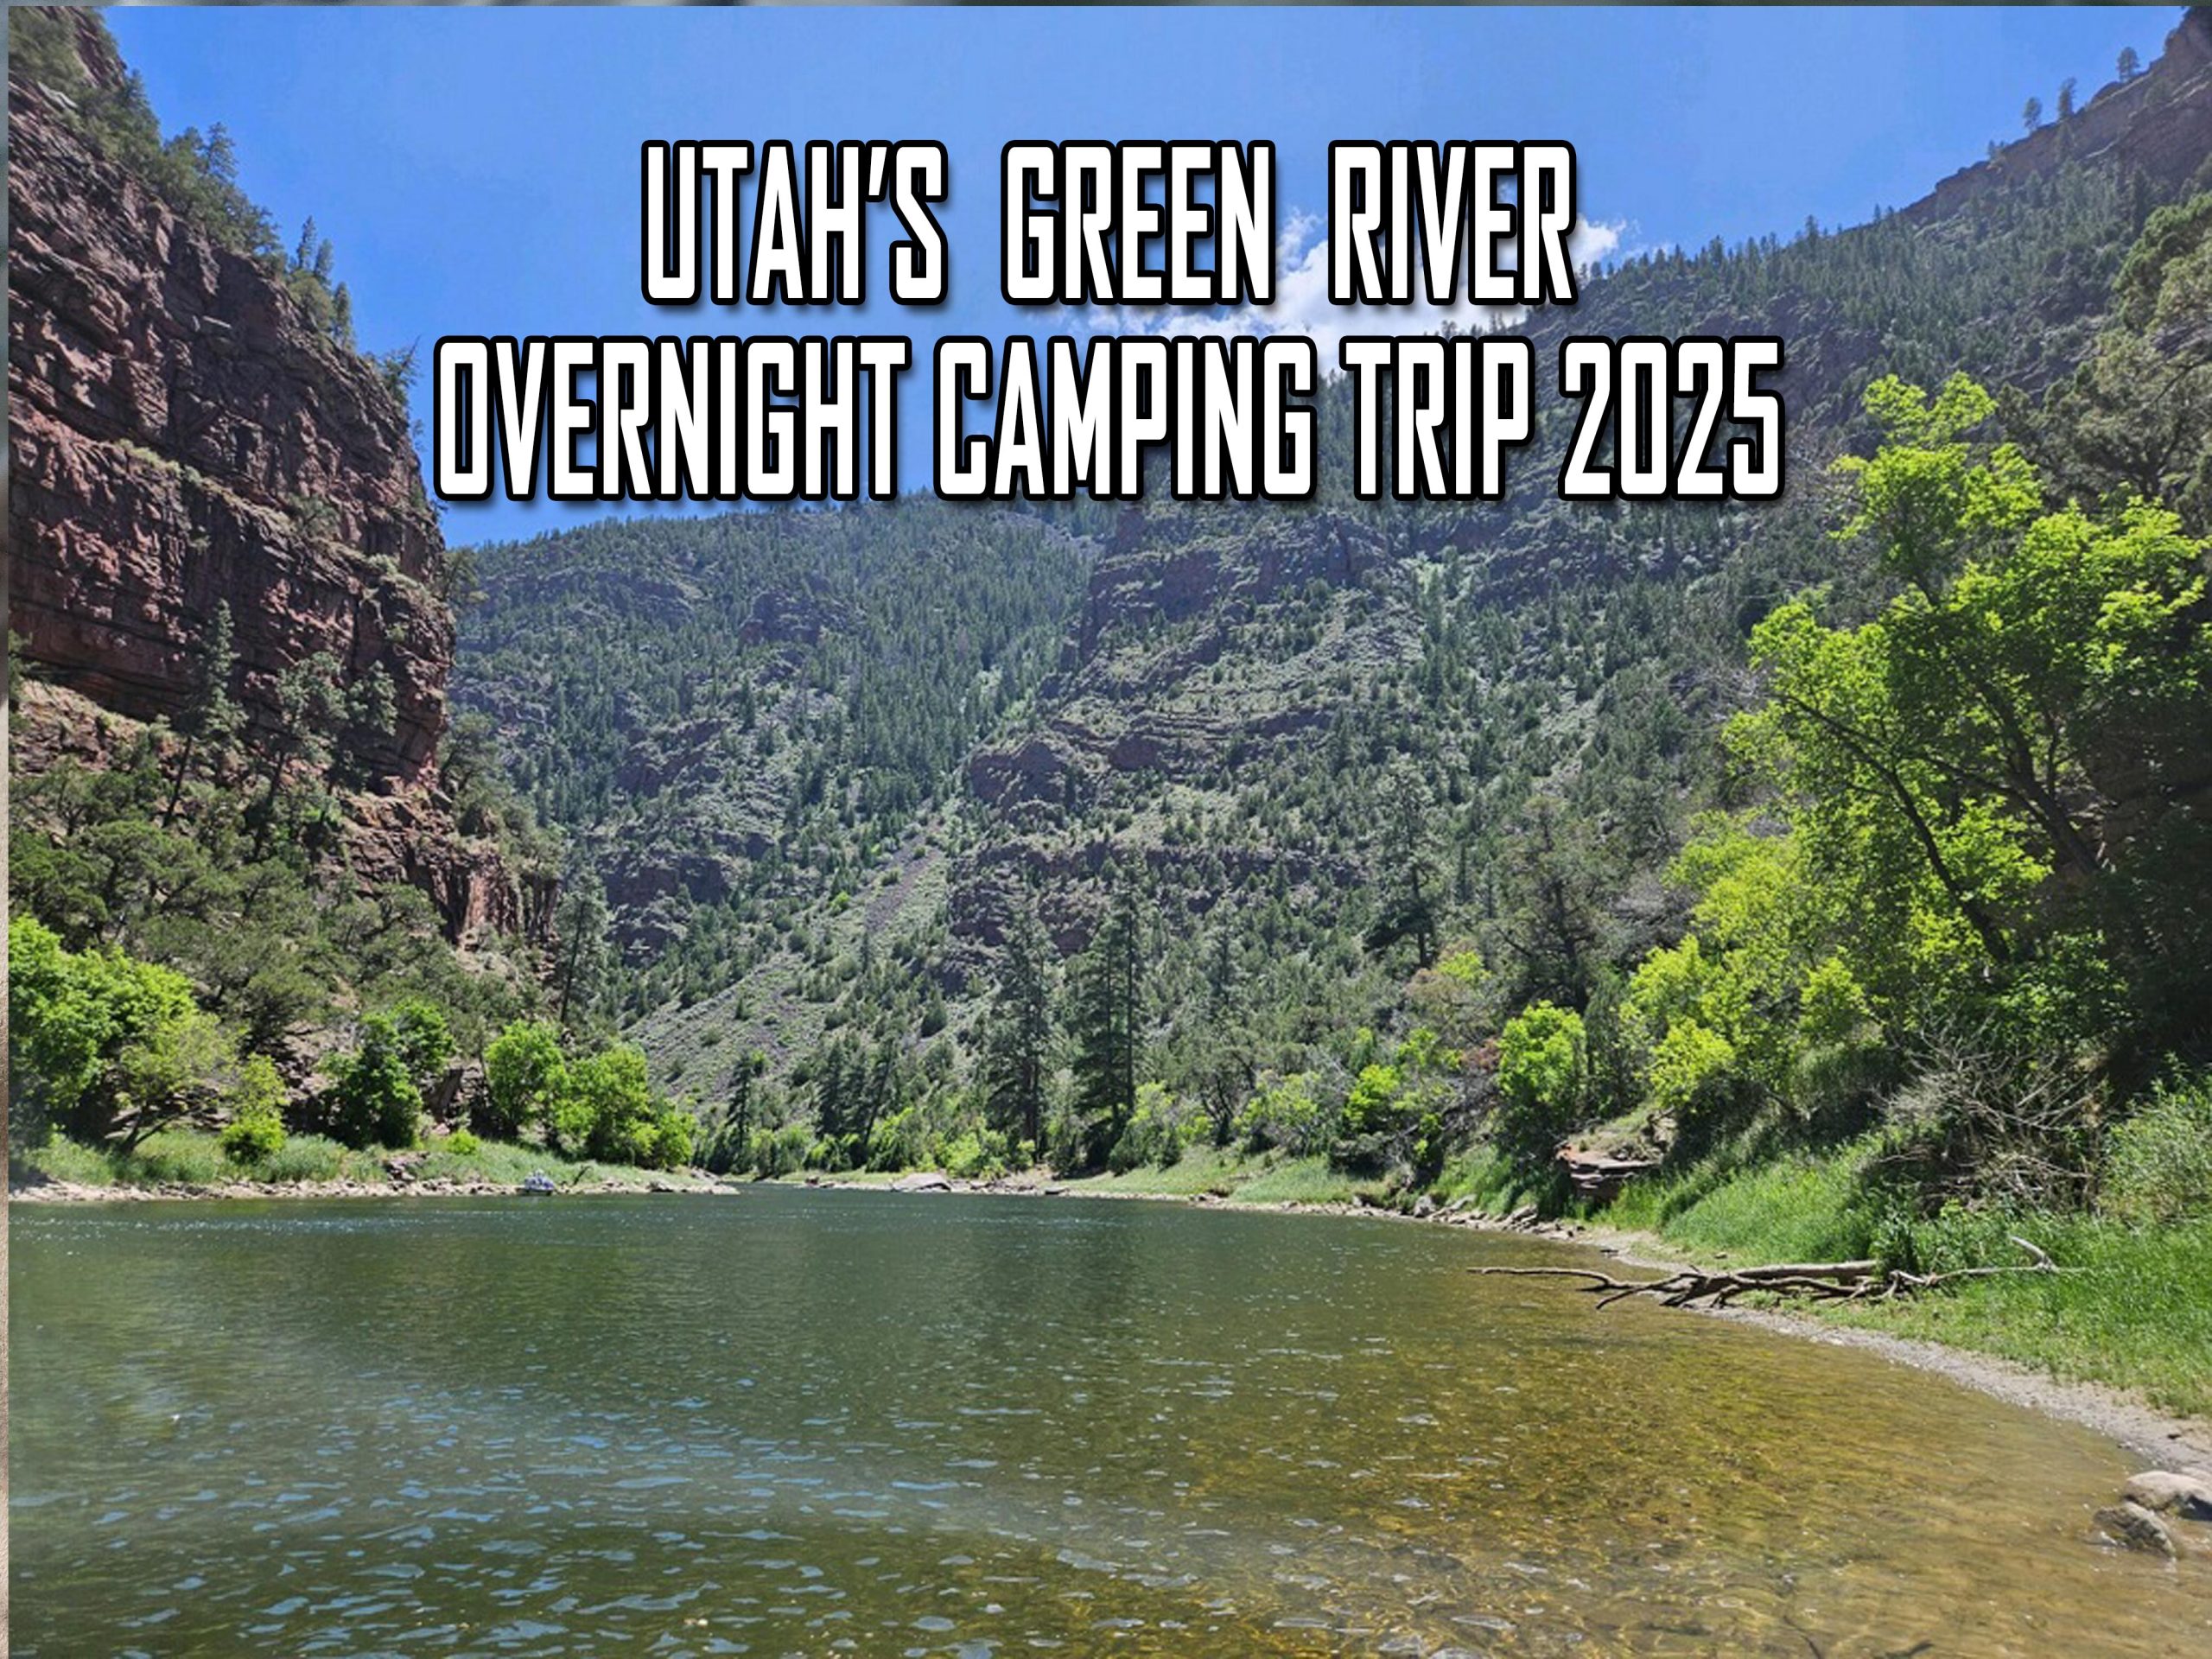 A Unique Trip On Utah's Best Waters. Spend Three Days Drifting The Green River, And We Will Campout On The Green River One Night. You Will Get To Wade Fish The Provo, Weber Rivers Or Fish One Of The Many Spring Creeks For Two Days. Come Find Out What Utah Has To Offer In One Trip.